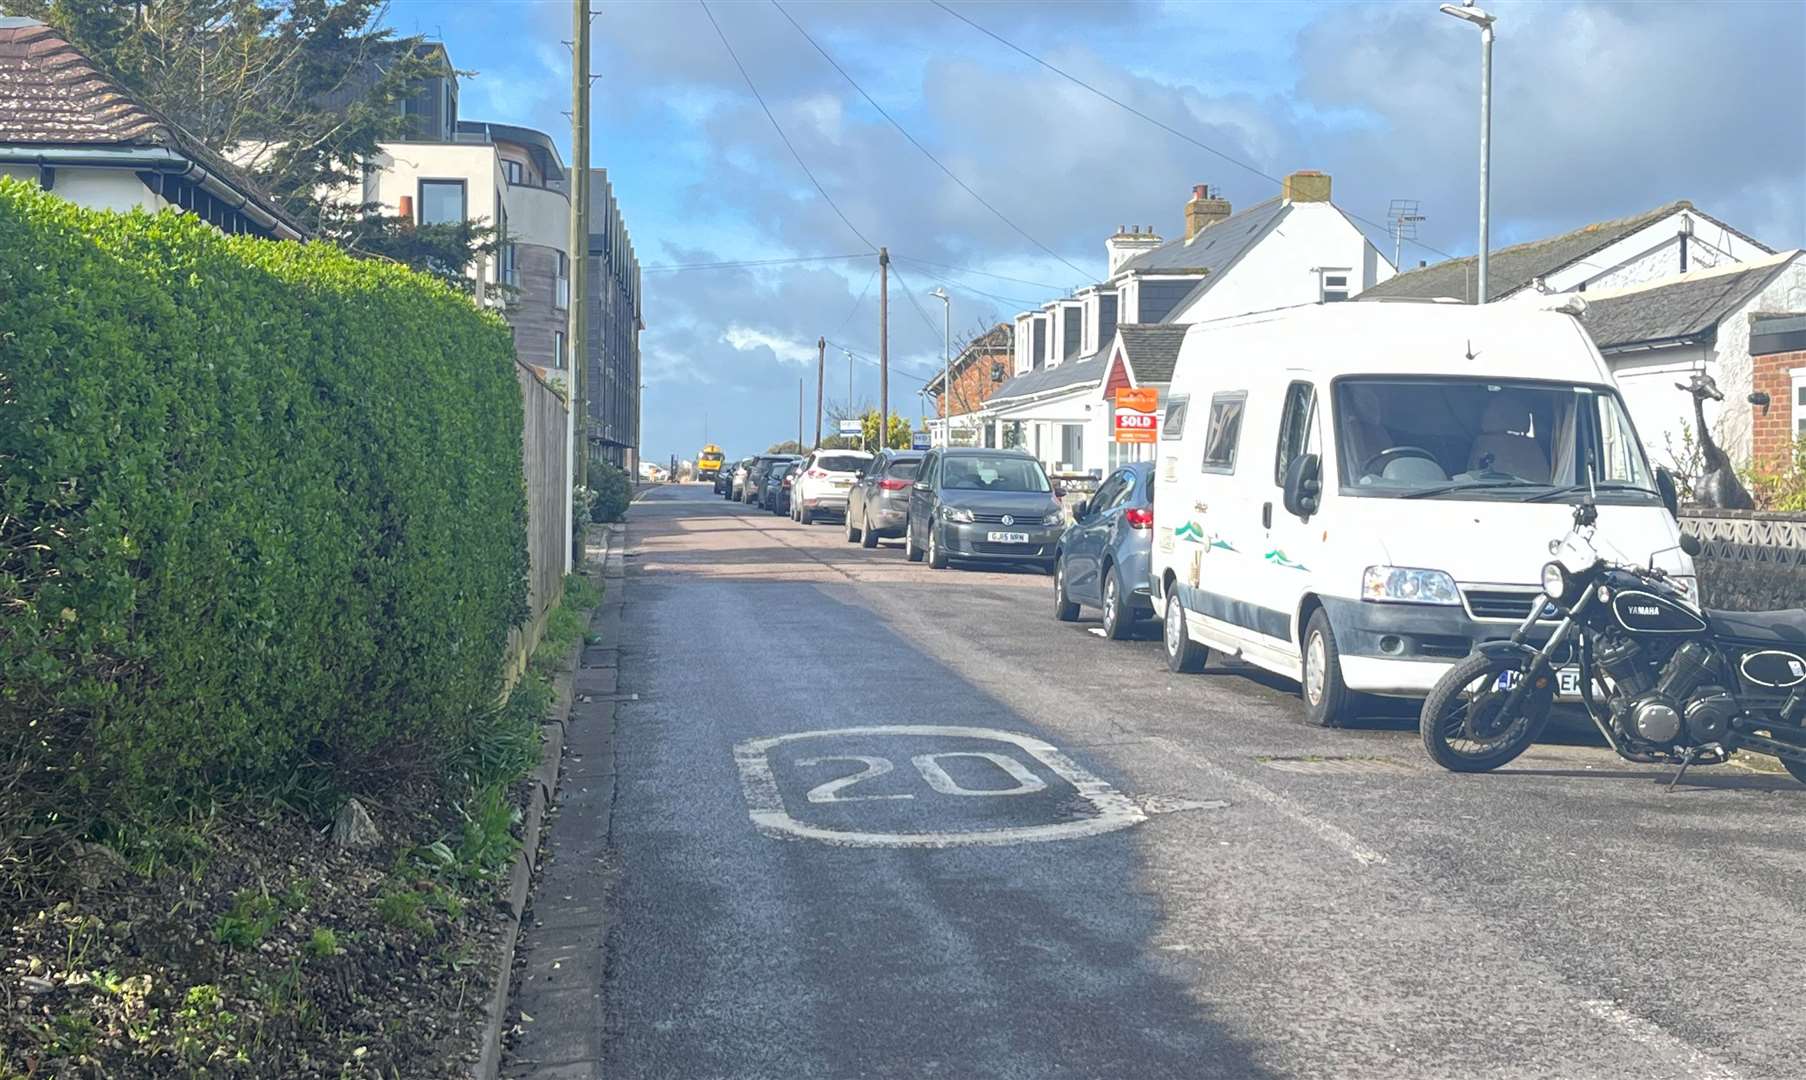 Some residents doubt the 20mph speed limit is followed when wastewater tankers are heading to the Range Road pumping station in Hythe throughout the night